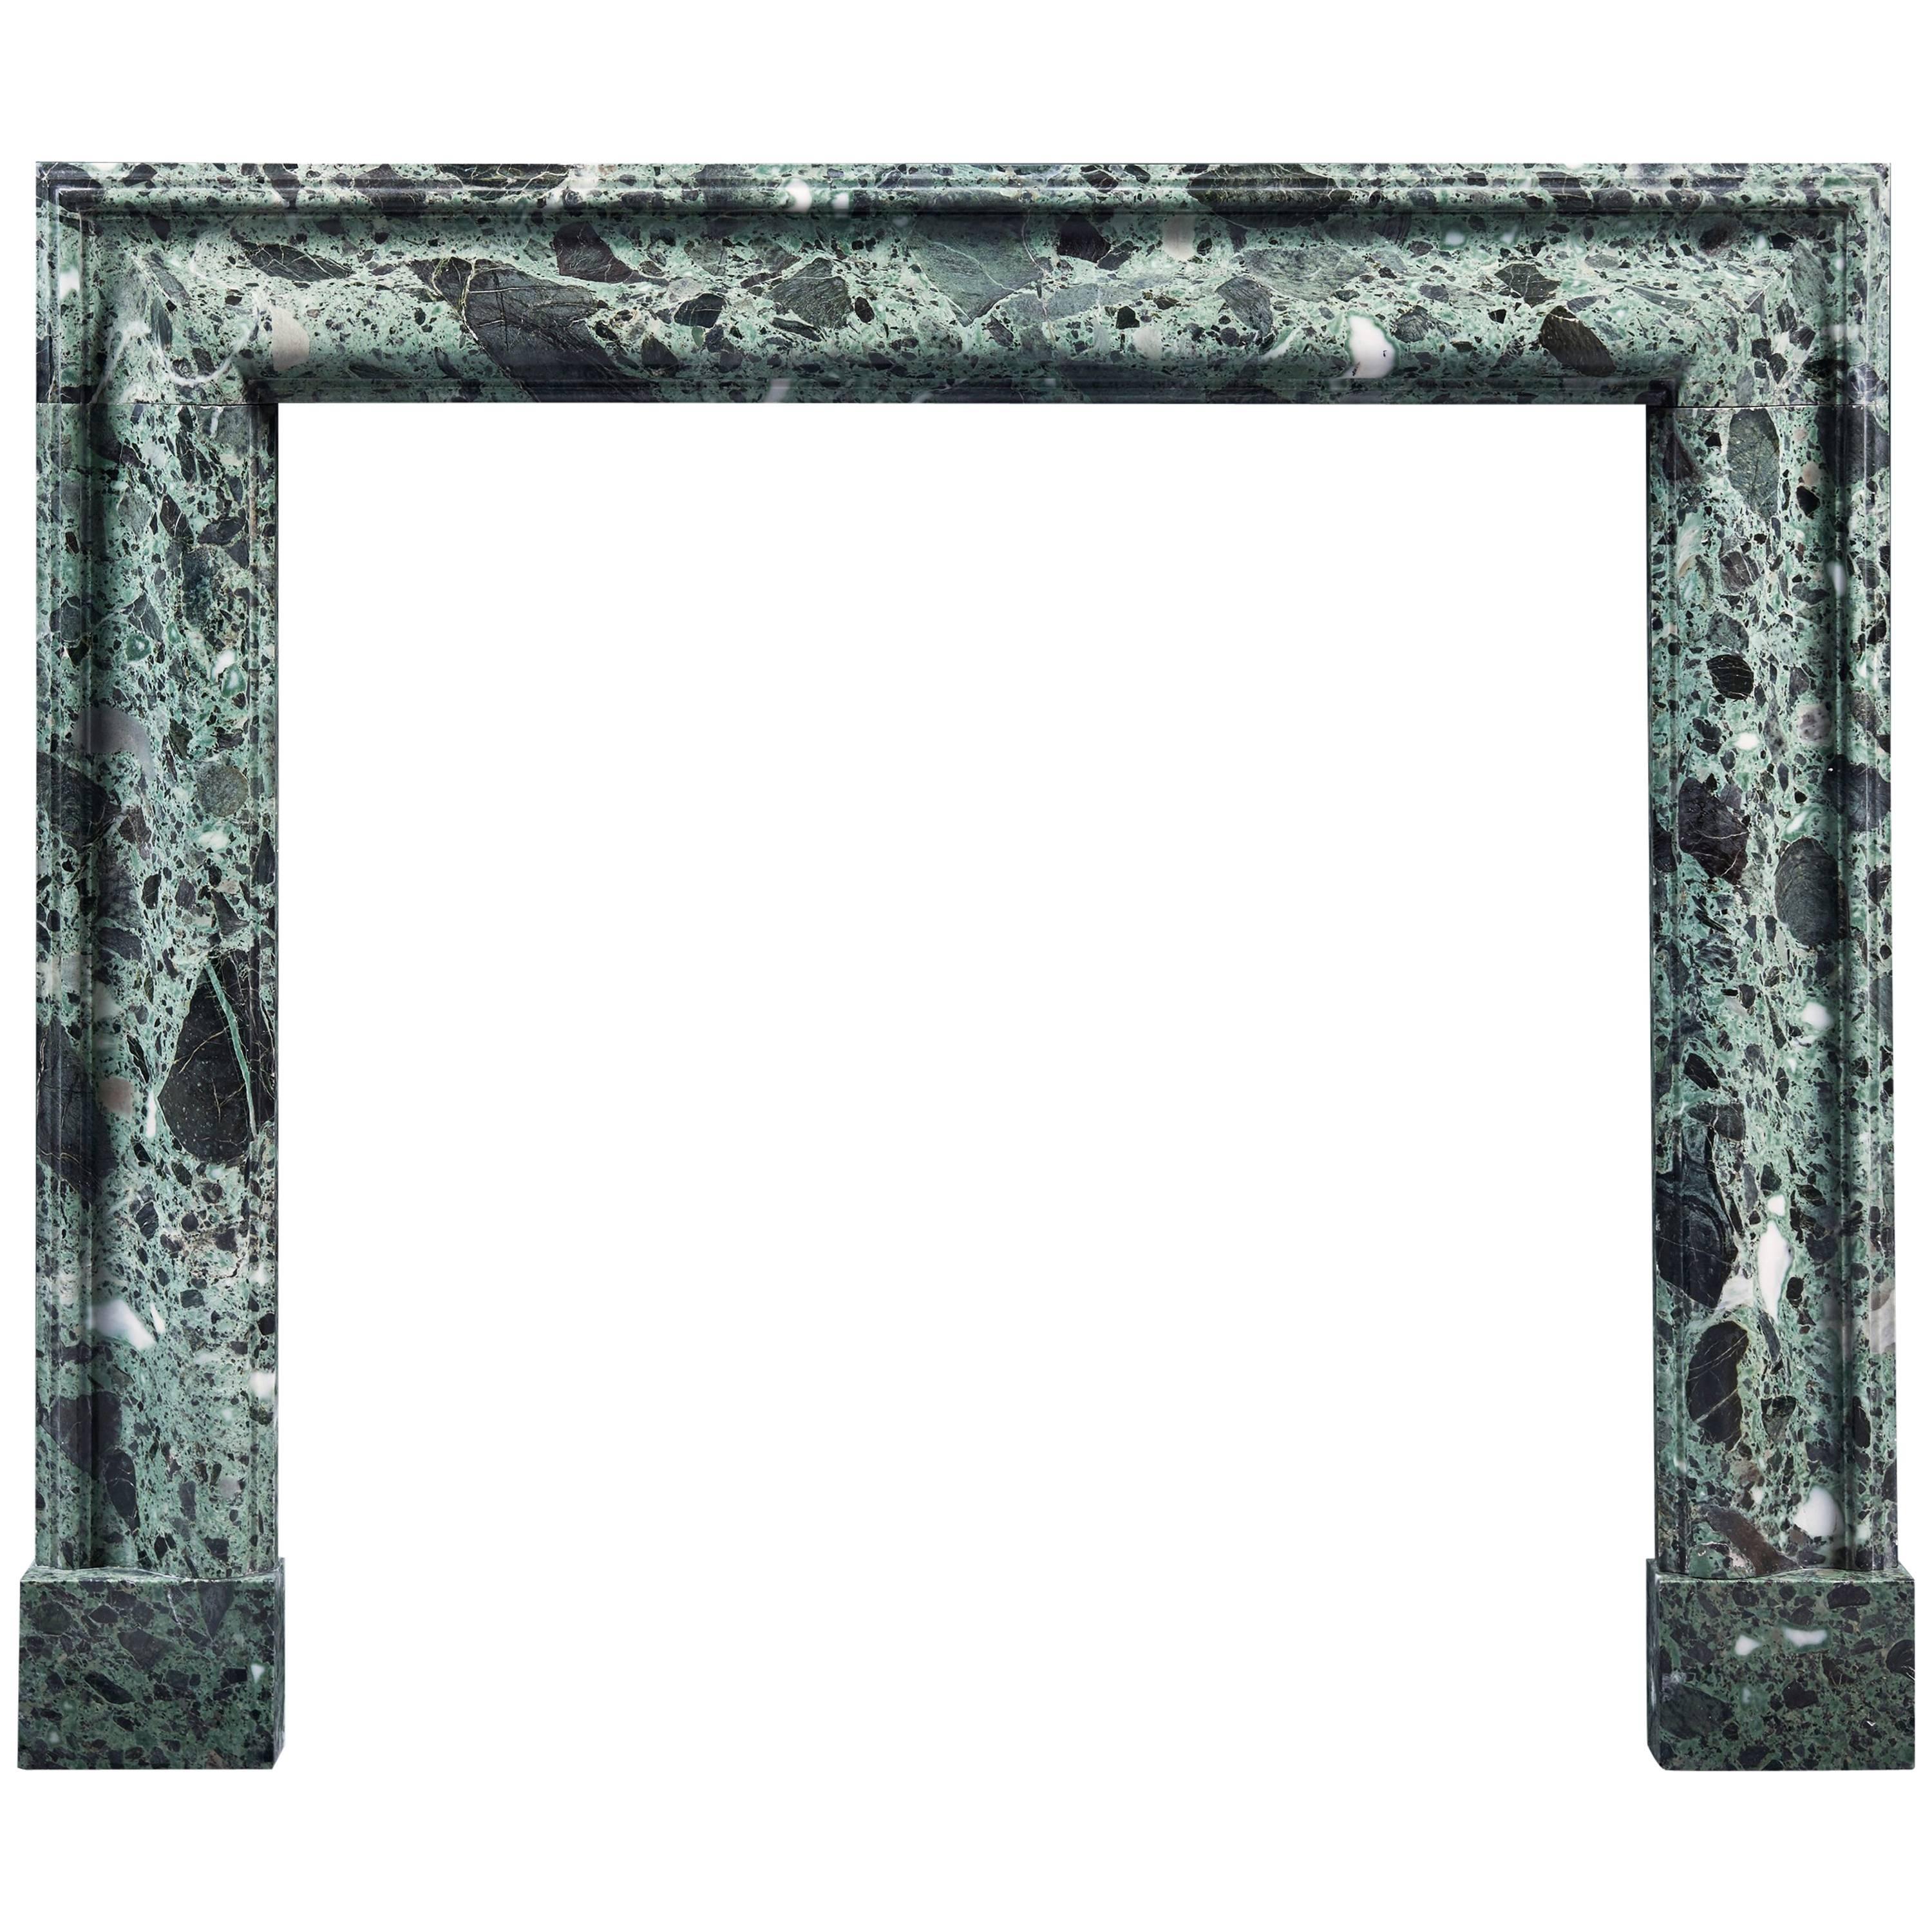 Antique Bolection Fireplace in Verde Antico Marble